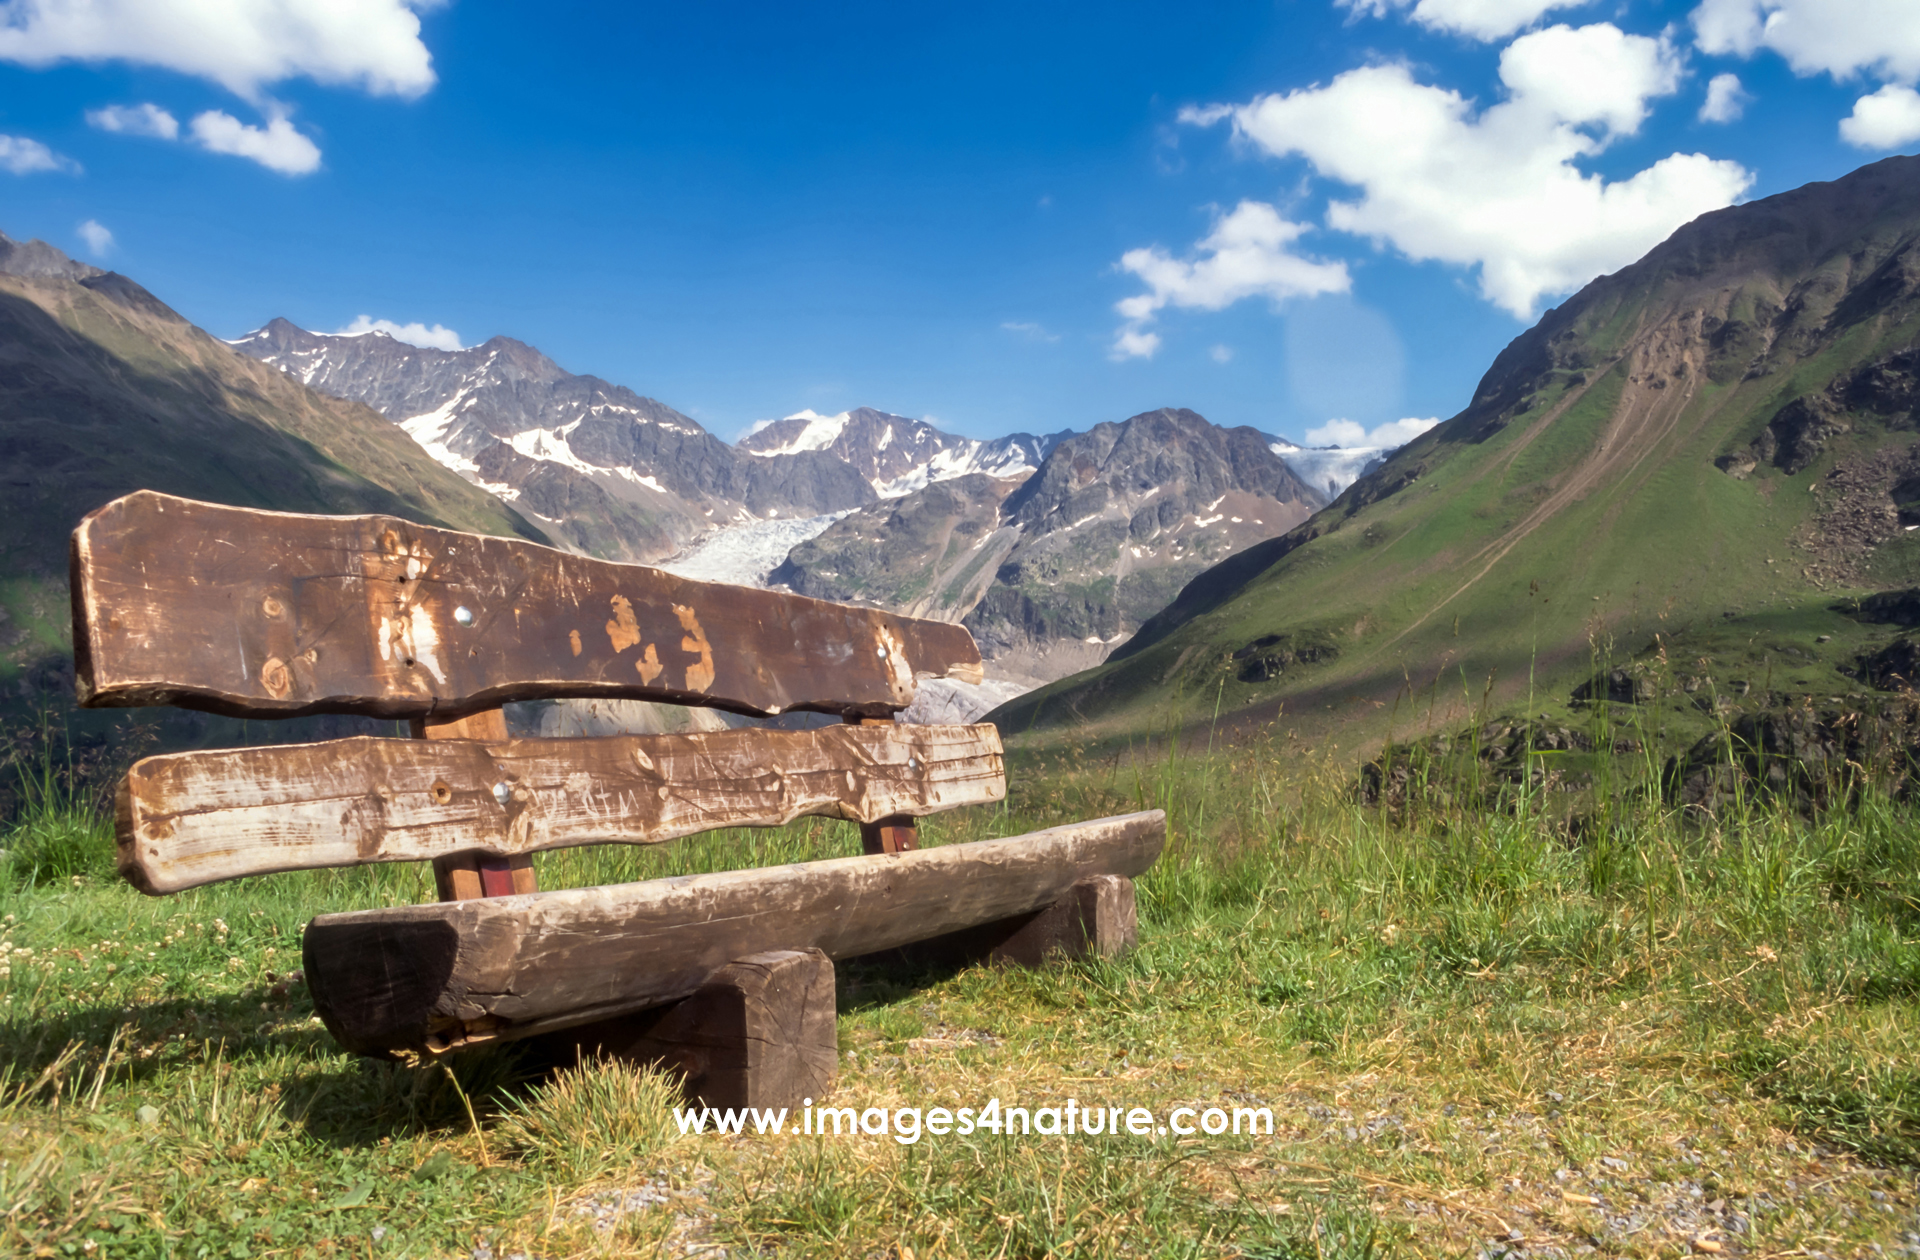 Wooden bench on alpine hiking trail inviting to take a rest